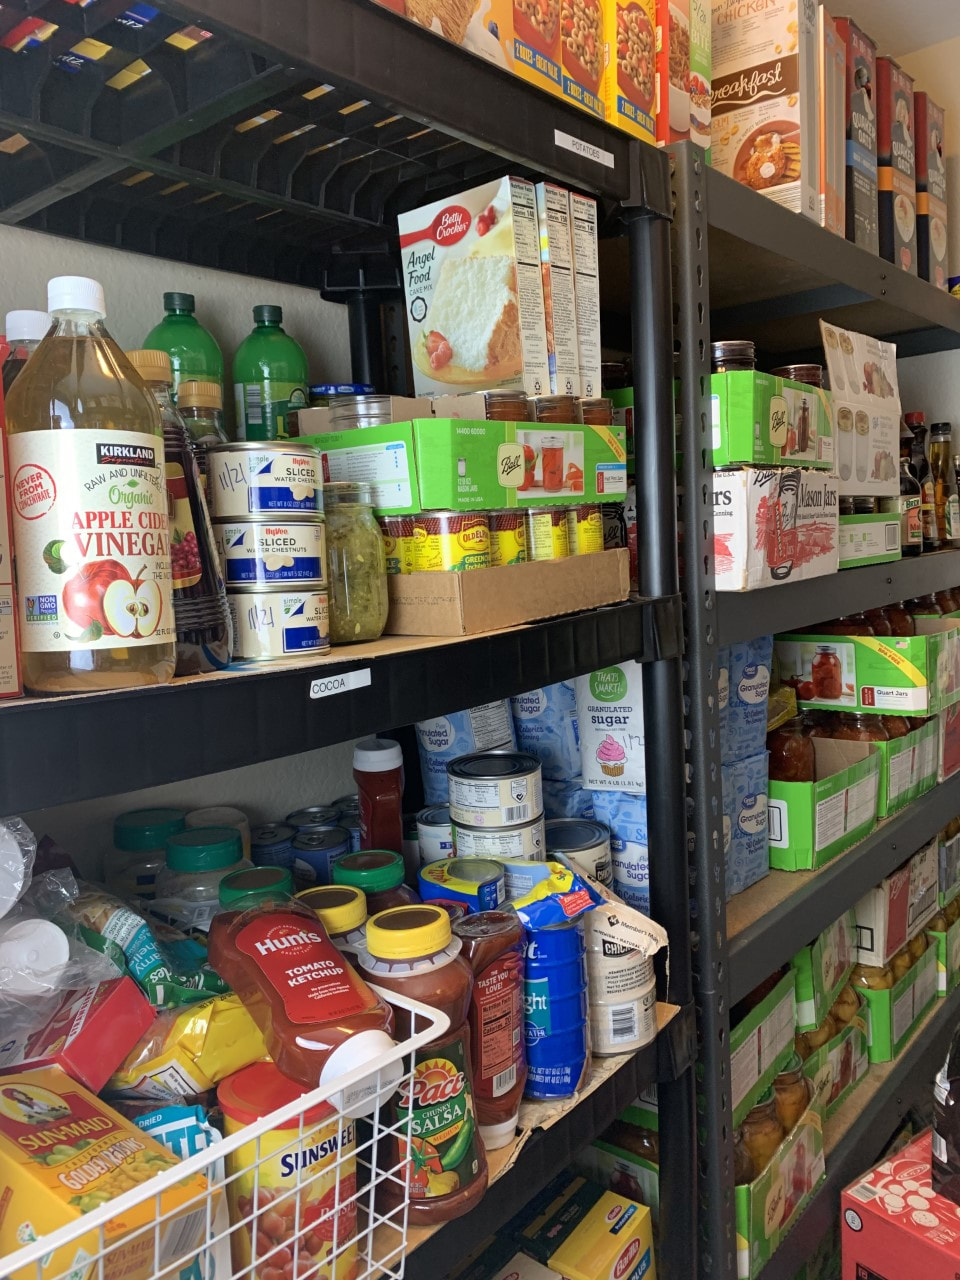 Basement pantry lined with shelves filled with non-perishable food and canned food.